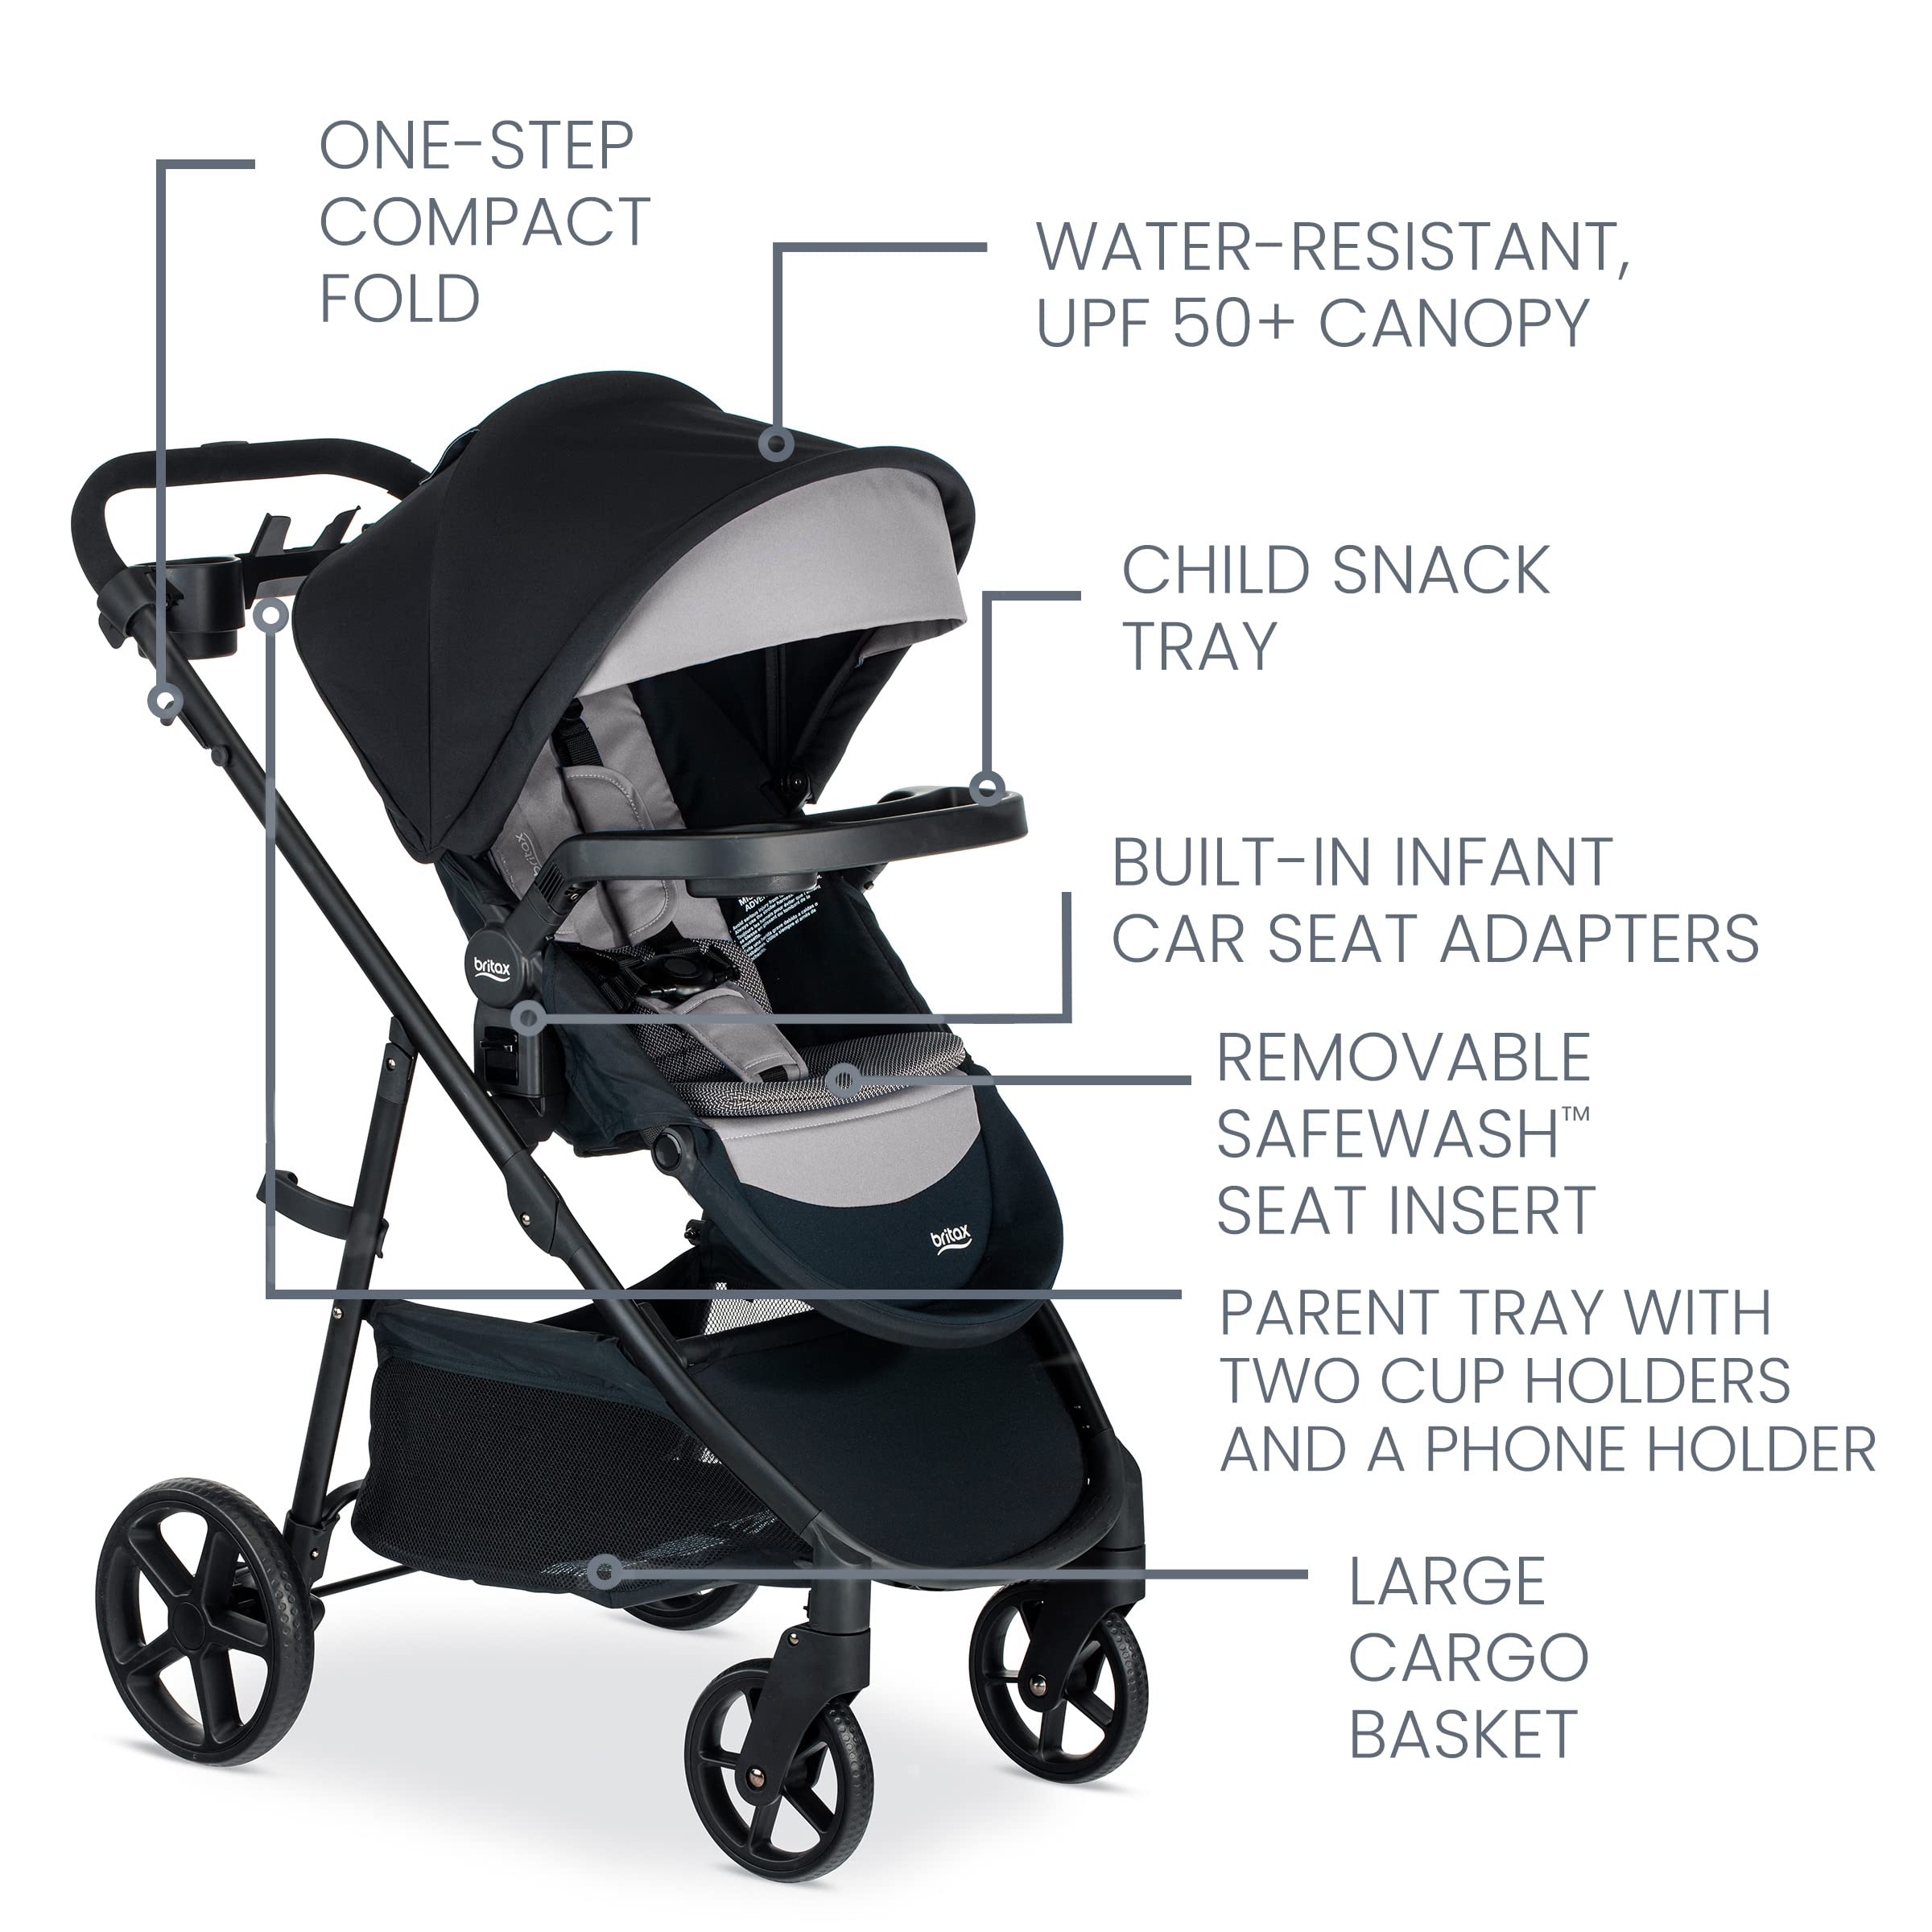 Britax Willow Brook S+ Baby Travel System, Infant Car Seat and Stroller Combo with Alpine Base, ClickTight Technology, SafeWash Insert and Cover, Graphite Onyx